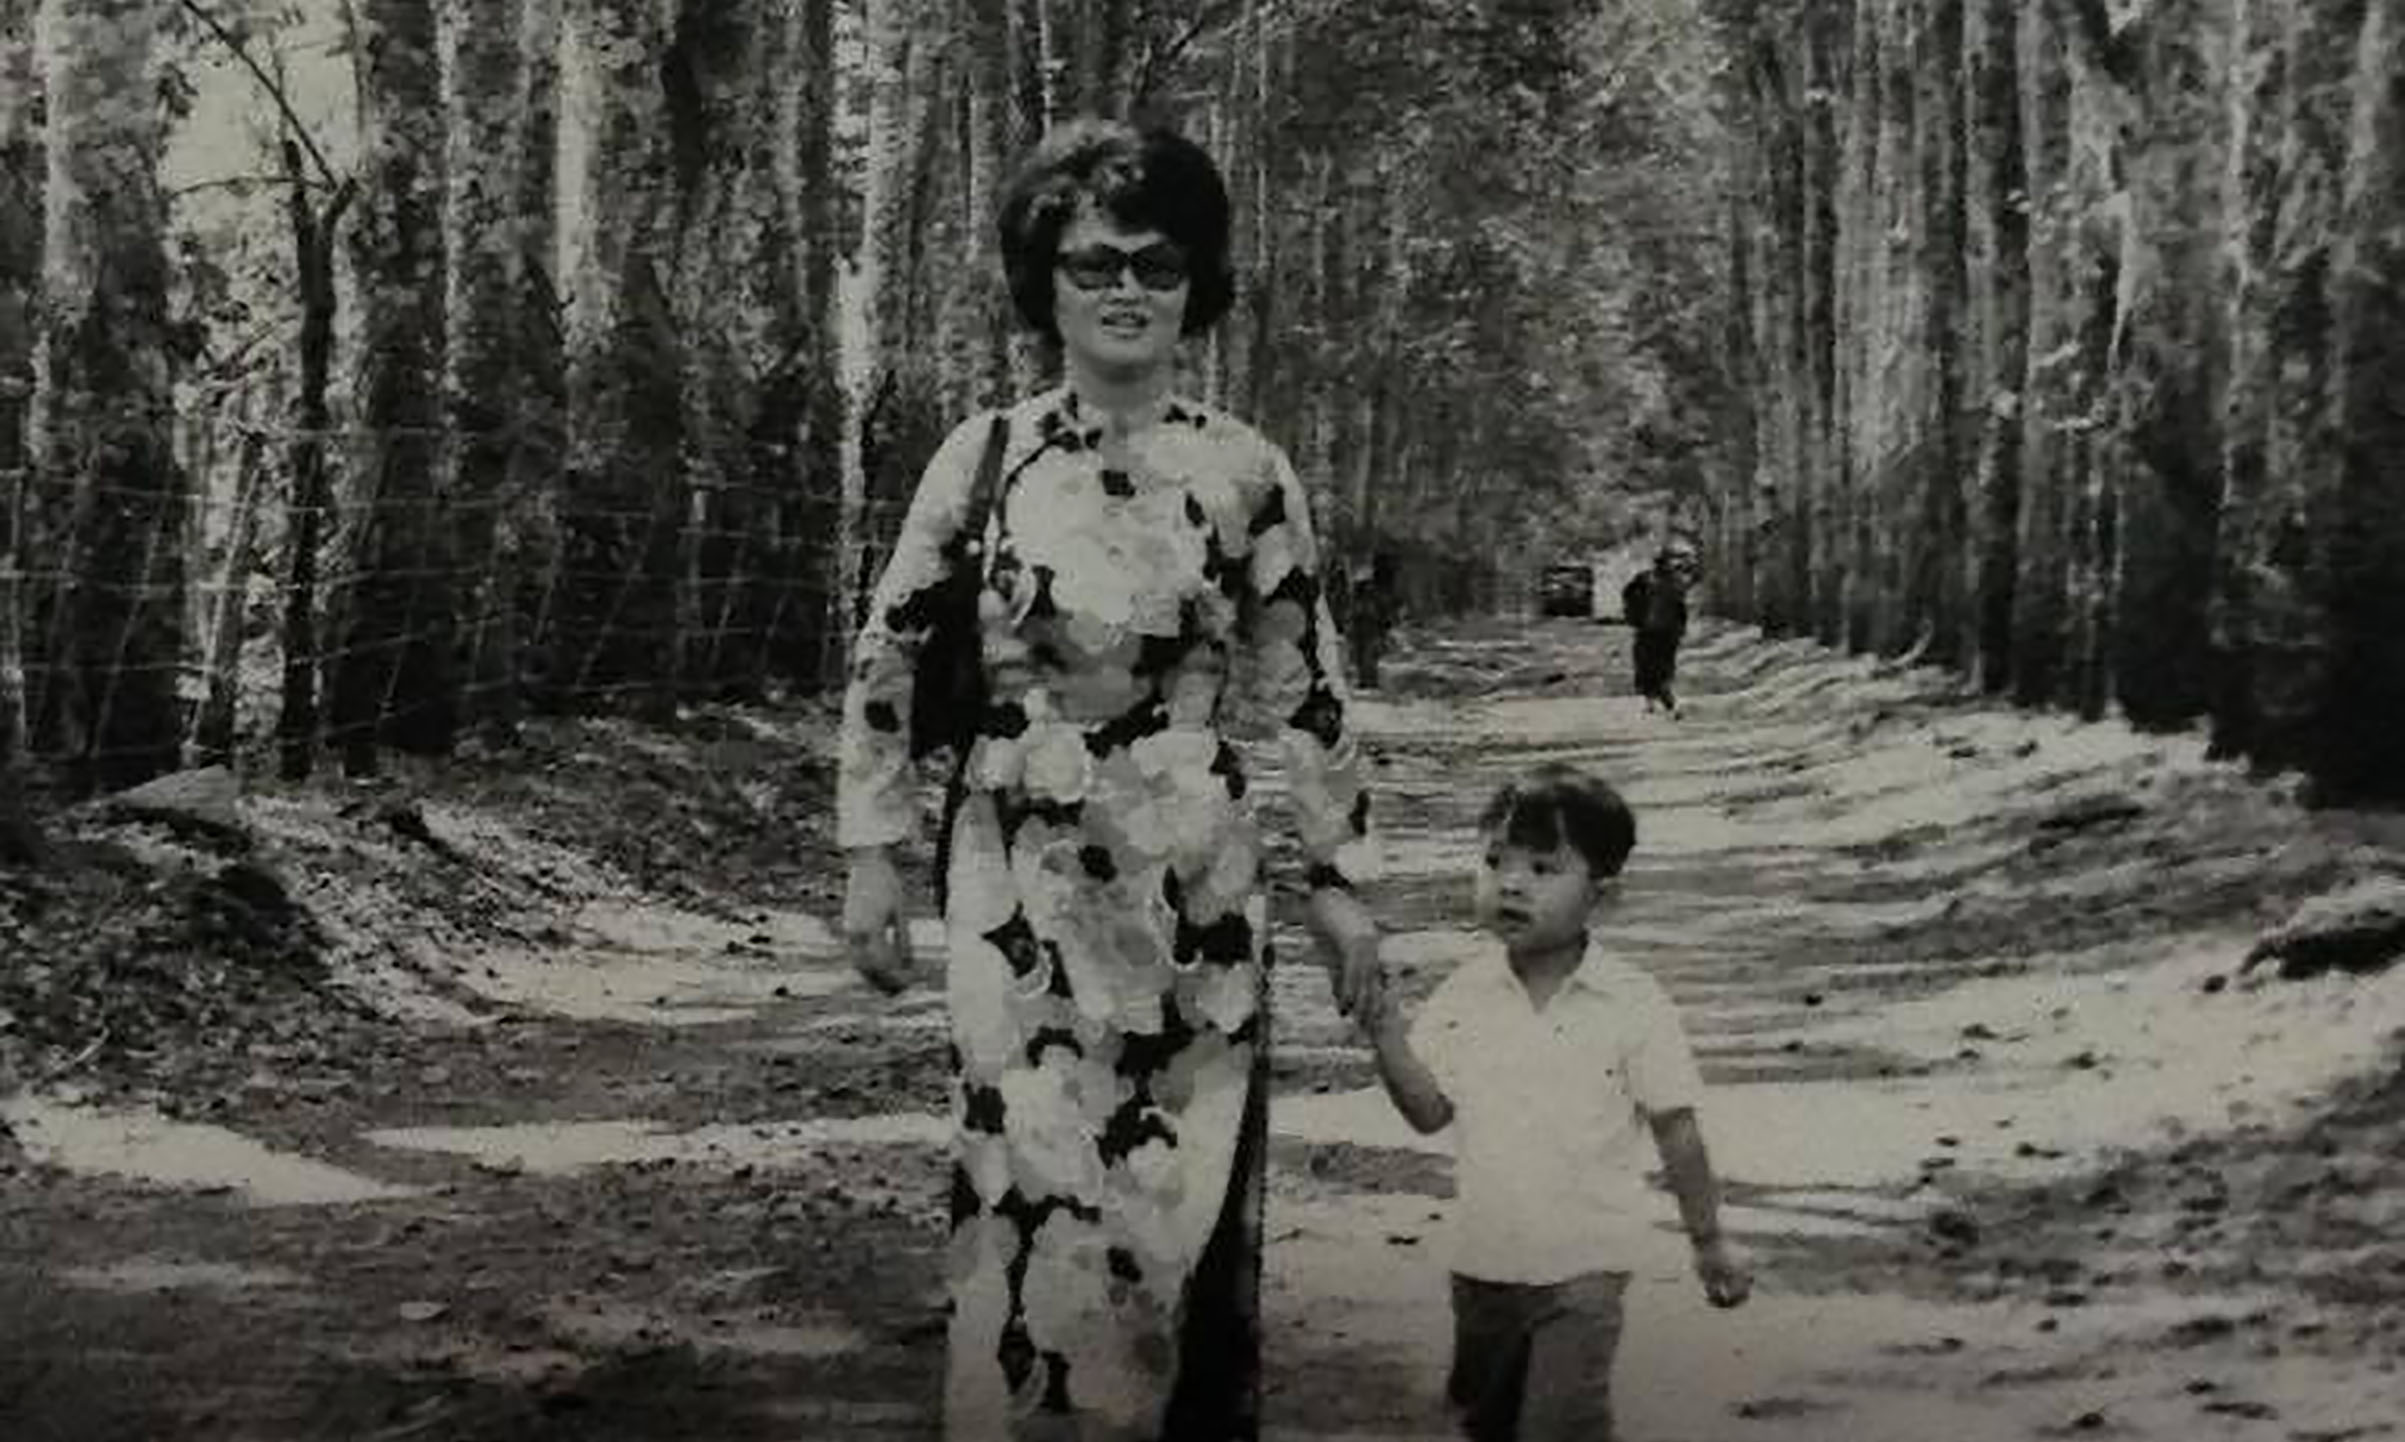 Nguyen with his mother in Vietnam, before they left for the U.S (Photographs Courtesy Viet Thanh Nguyen)